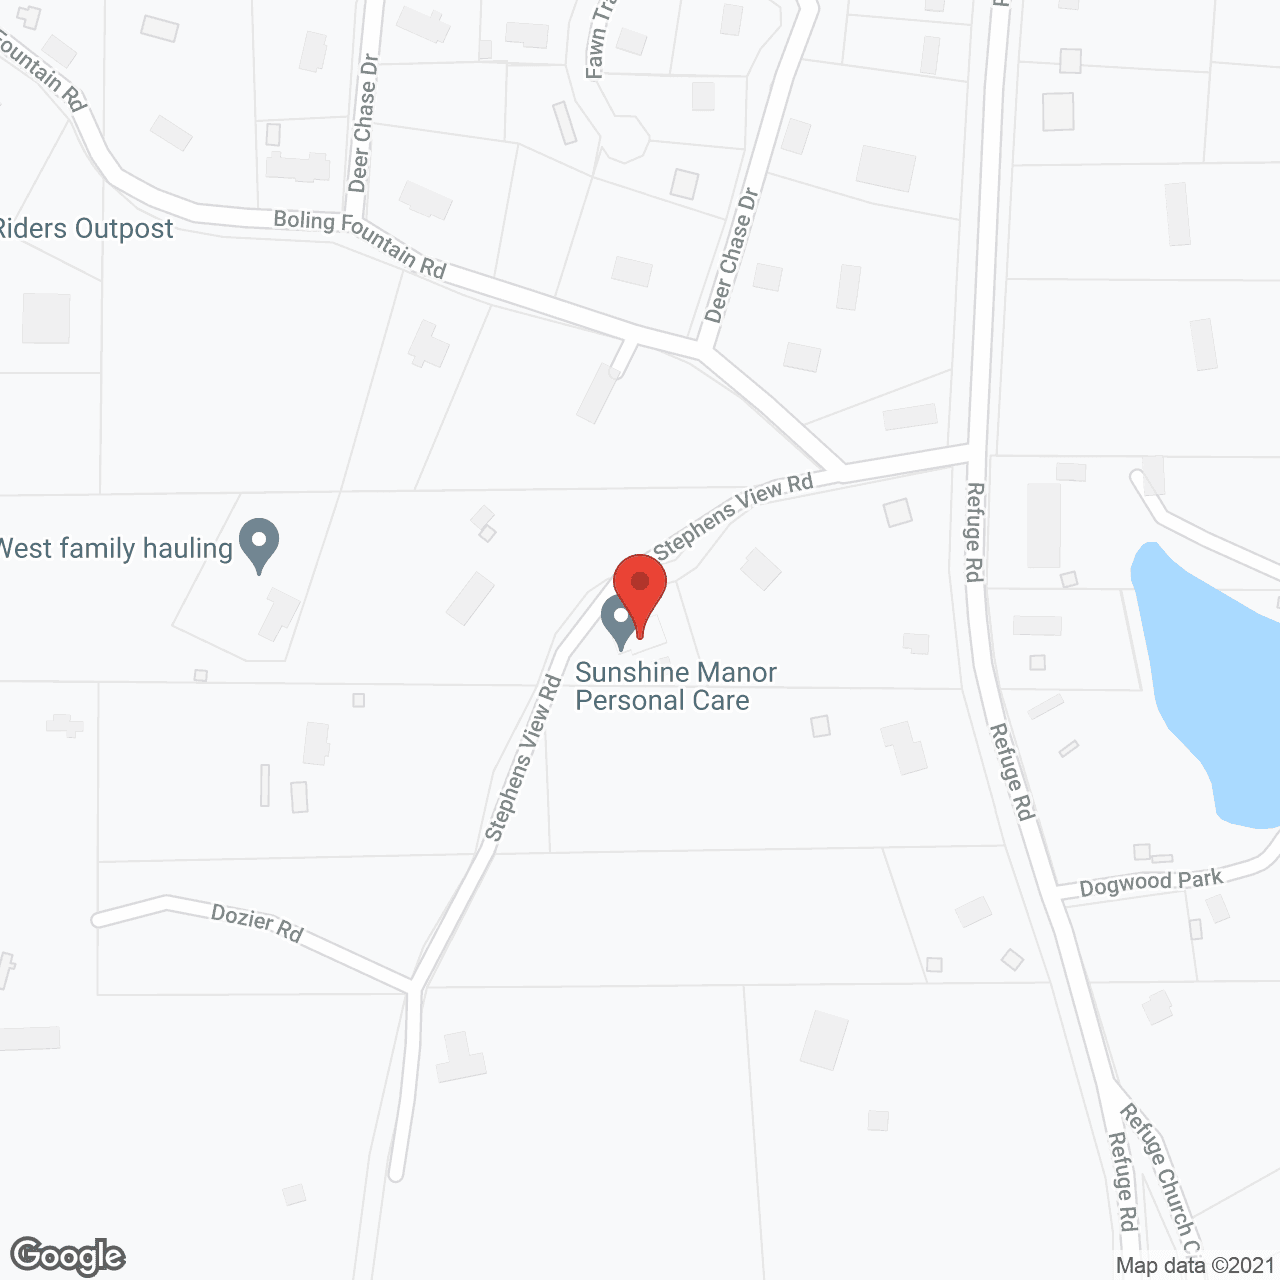 Sonshine Manor Personal Care Home in google map